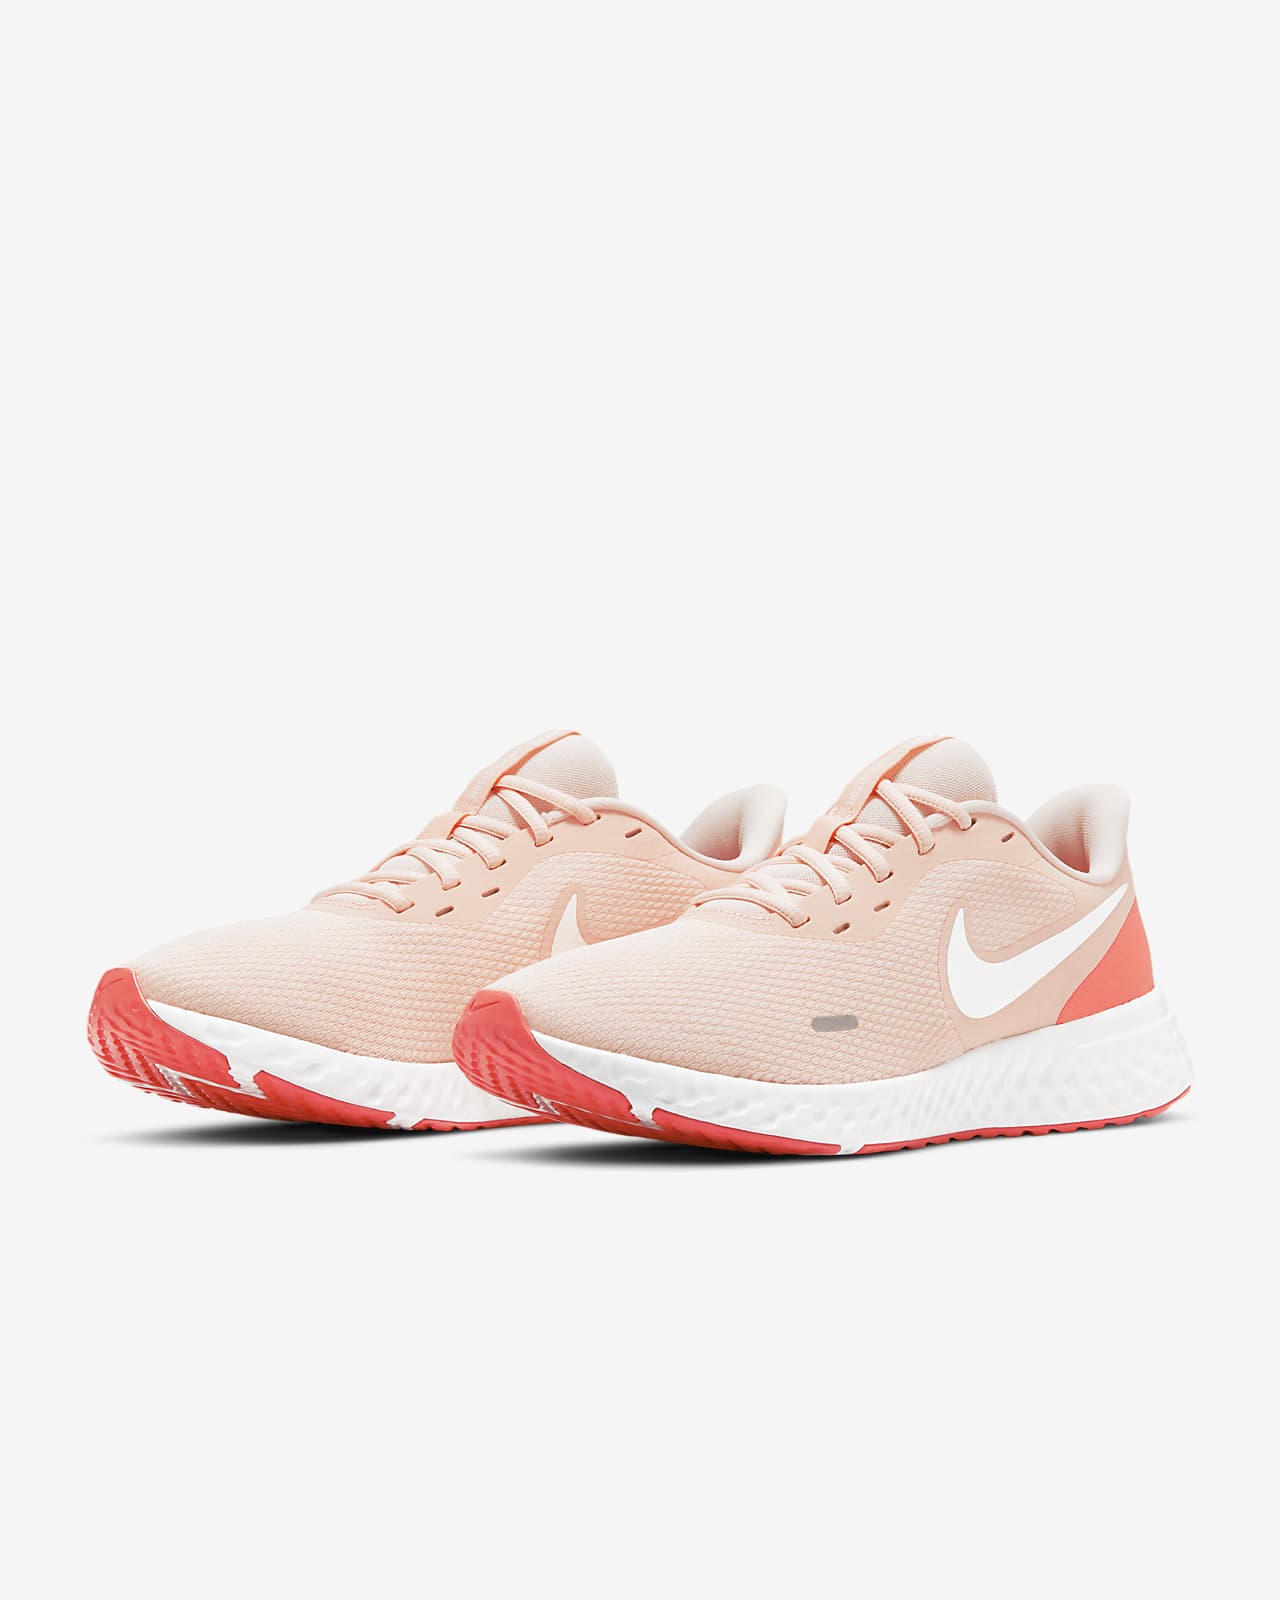 coral nike running shoes